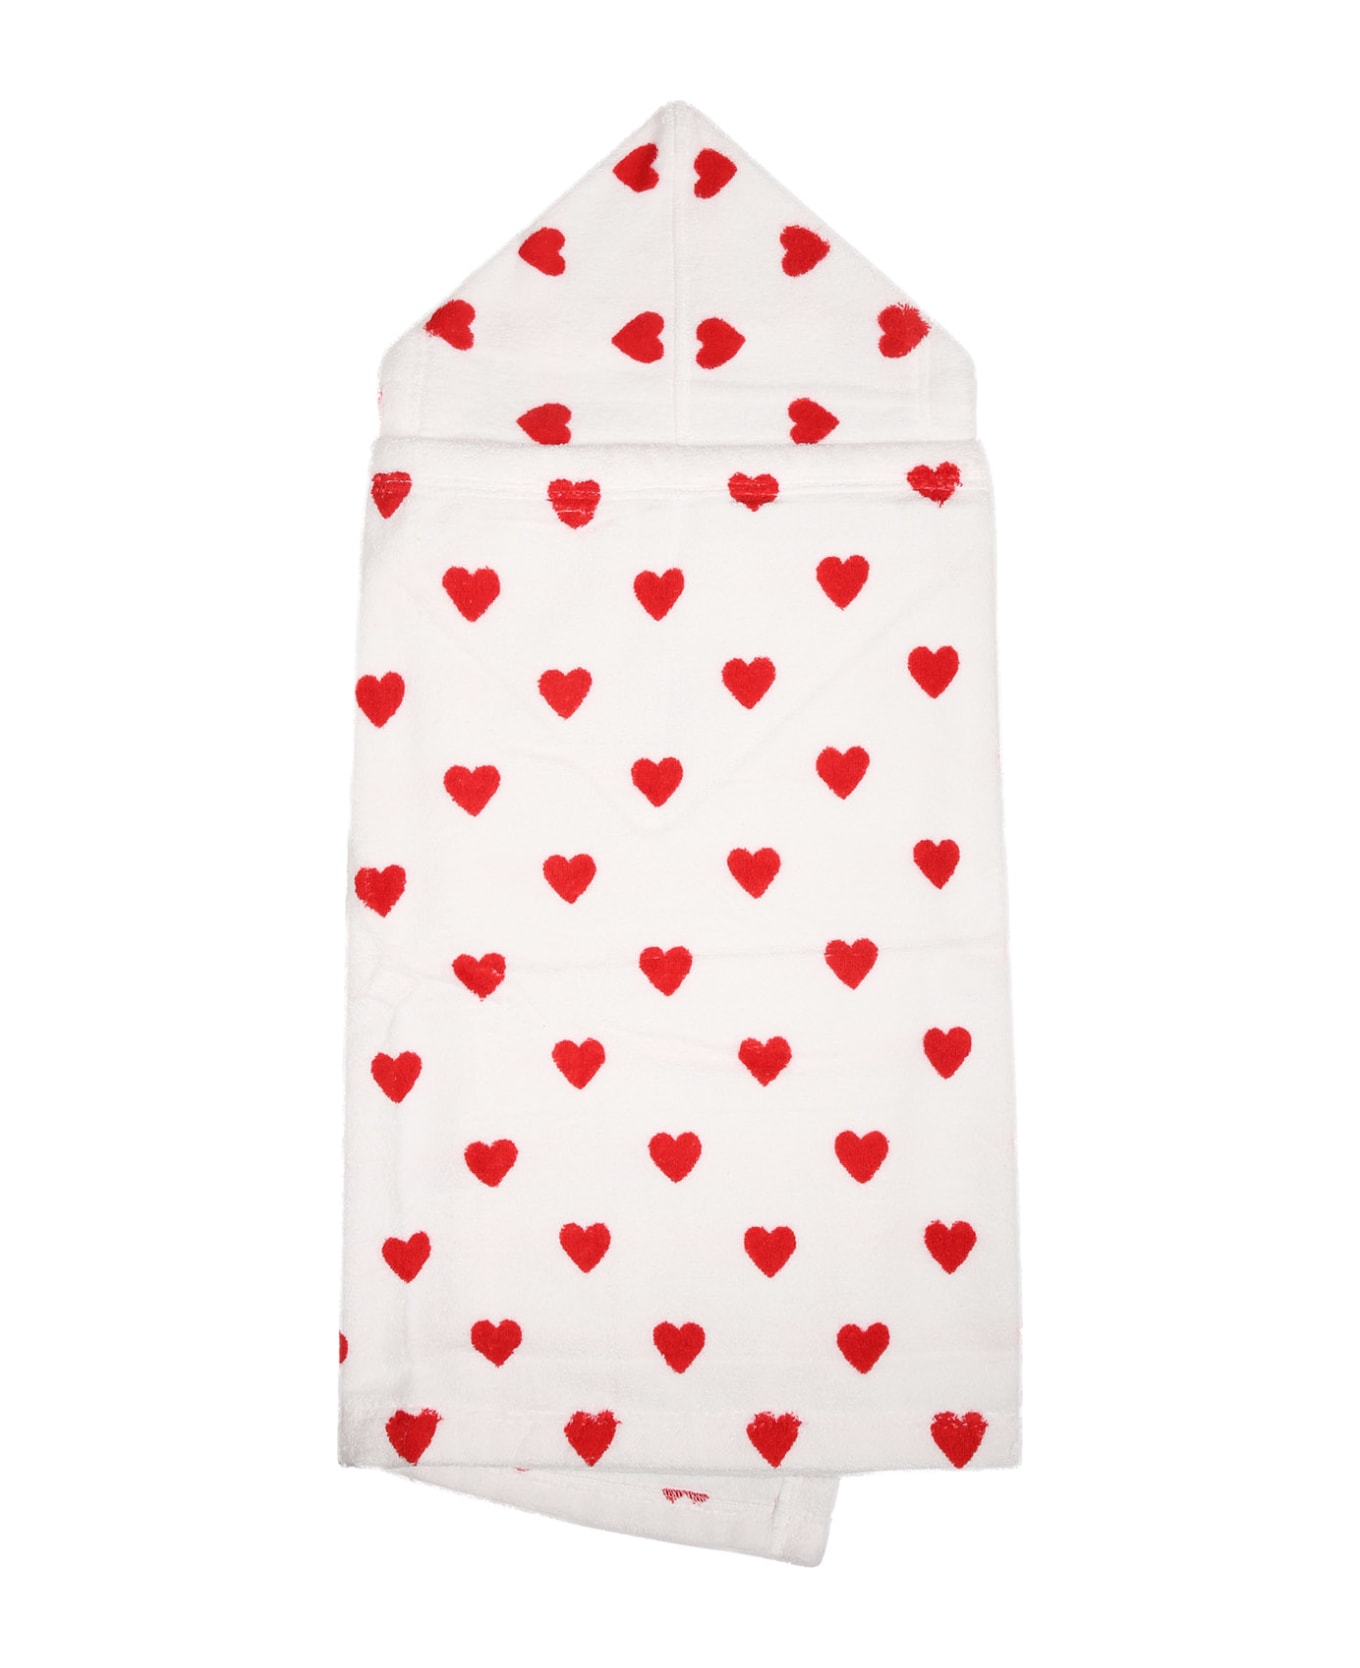 Petit Bateau White Bathrobe For Baby Girl With Hearts - White アクセサリー＆ギフト